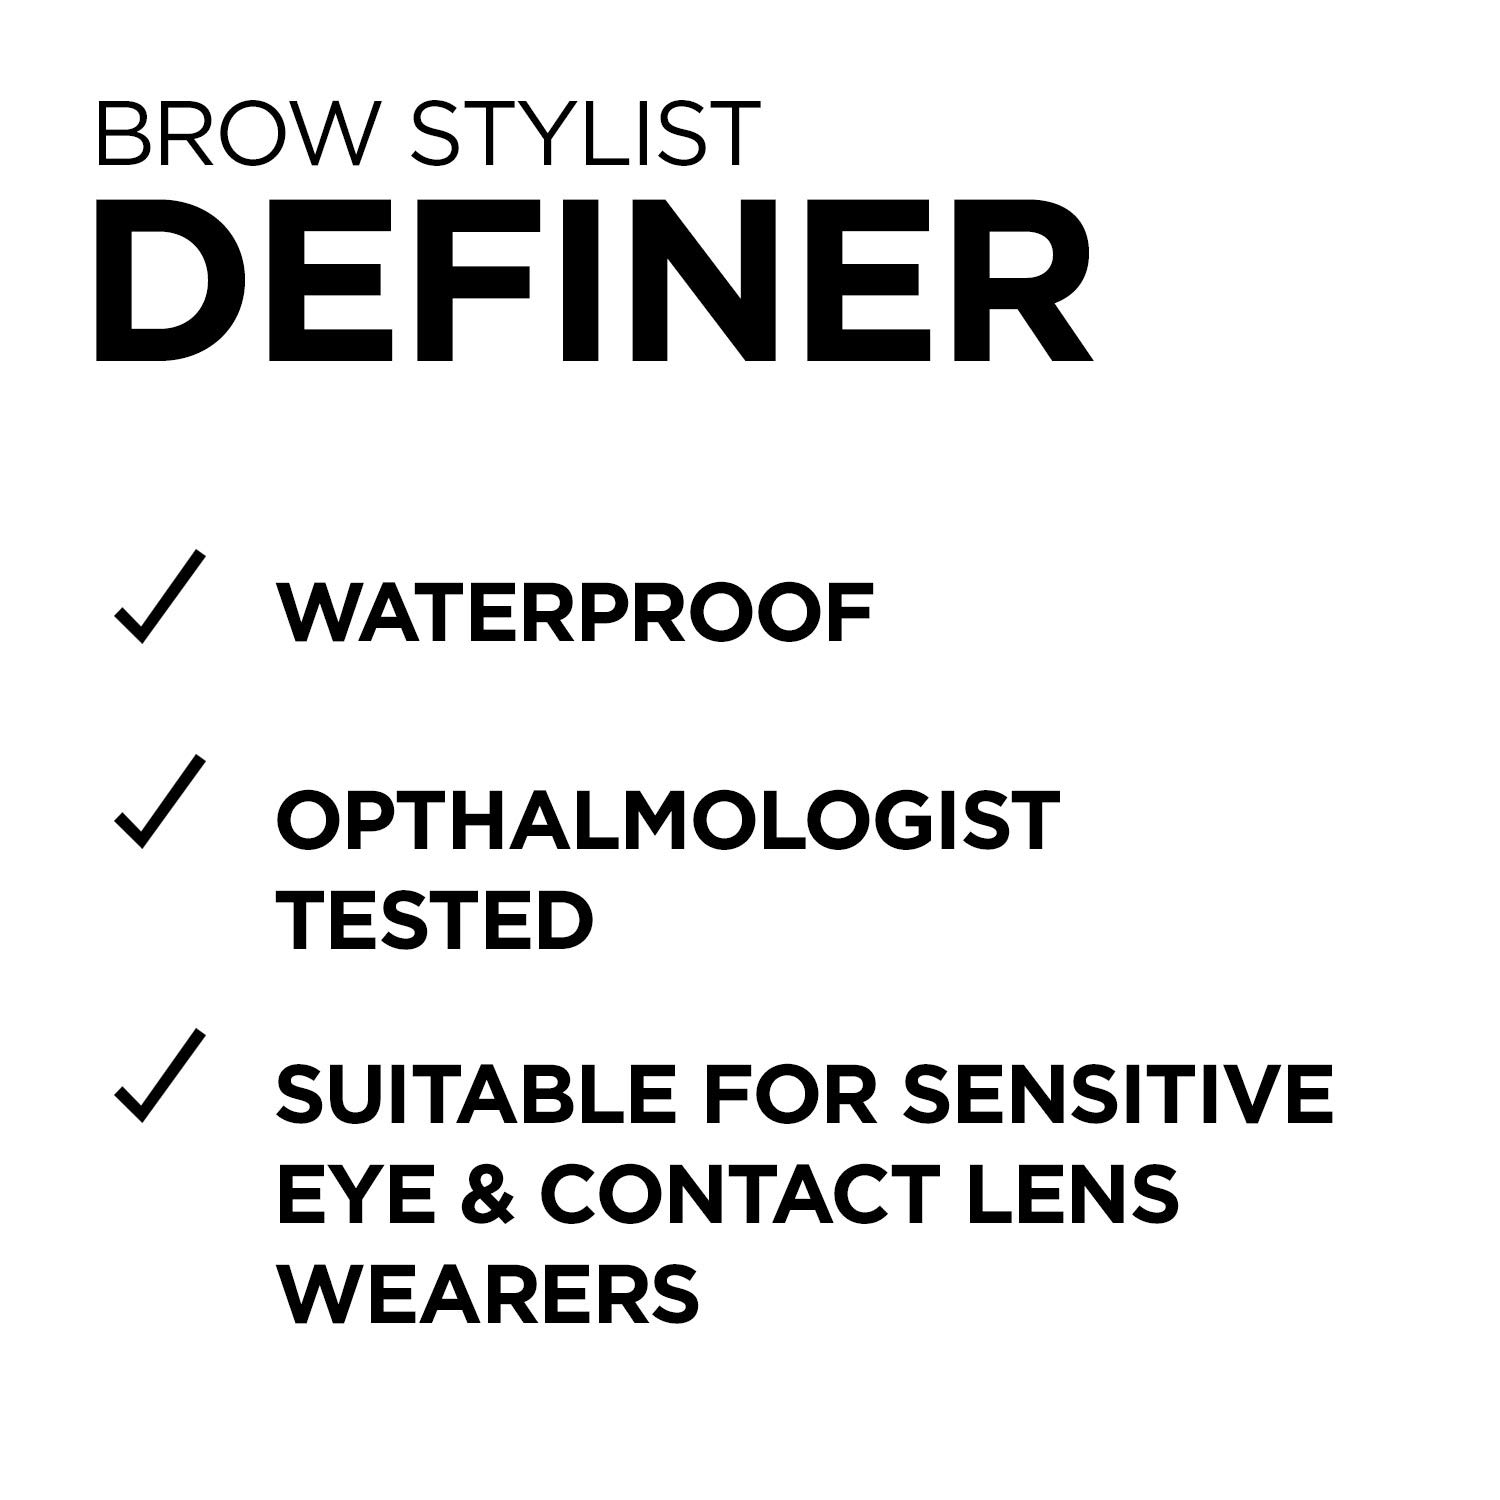 L'Oreal Paris Makeup Brow Stylist Definer Waterproof Eyebrow Pencil UltraFine Mechanical Pencil Draws Tiny Brow Hairs Fills in Sparse Areas Gaps Ounce Count